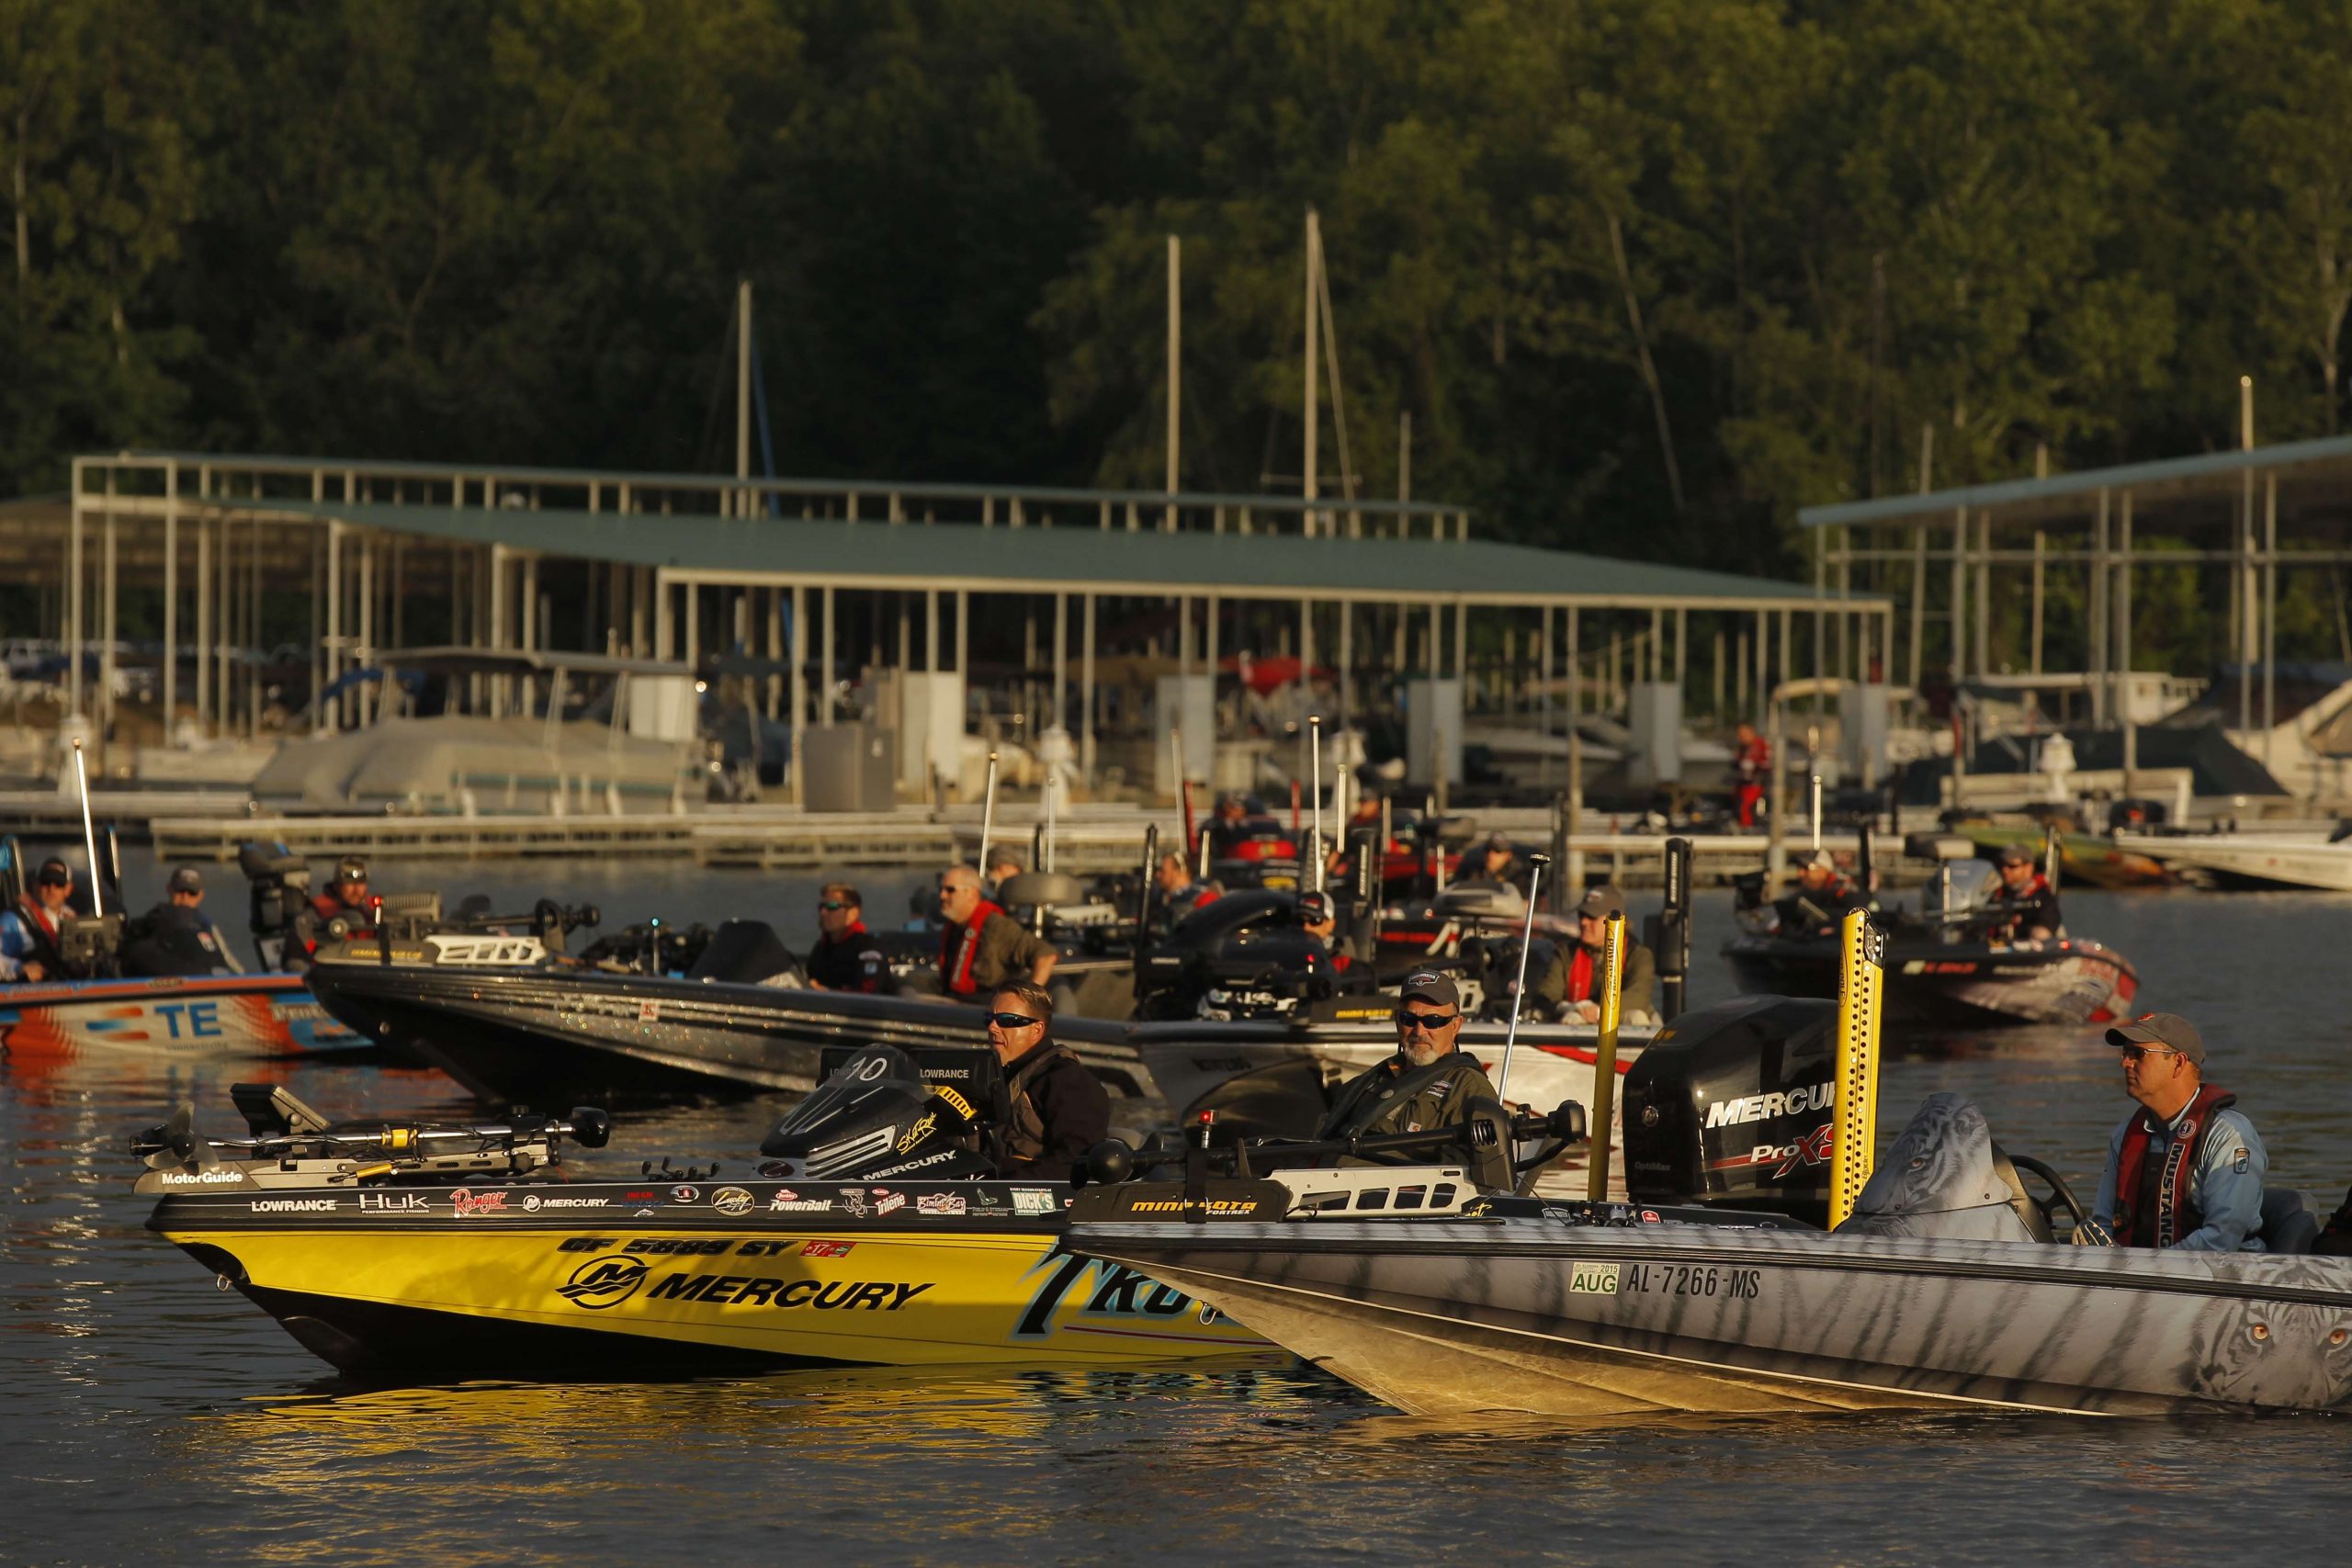 The boats slowly float in and get organized for launch.